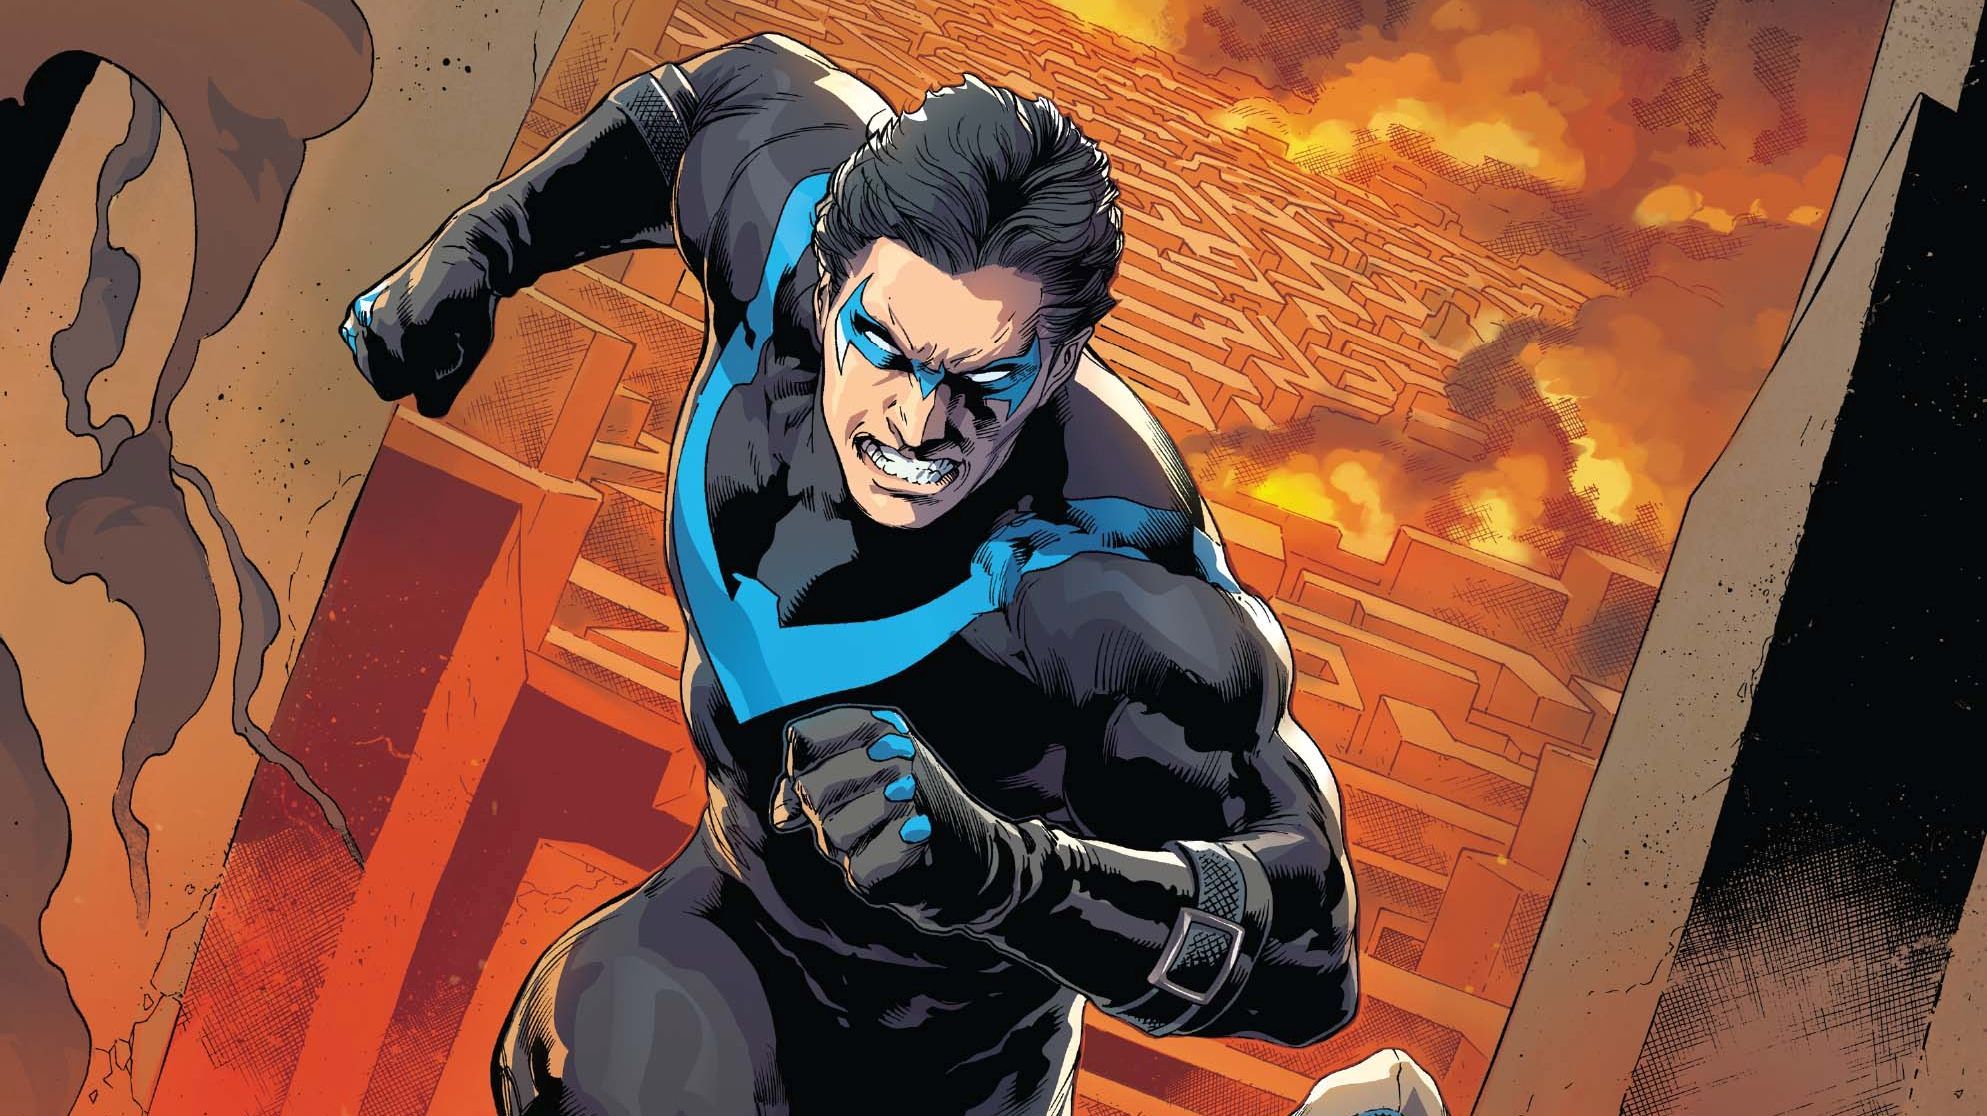 Nightwing #4 , HD Wallpaper & Backgrounds